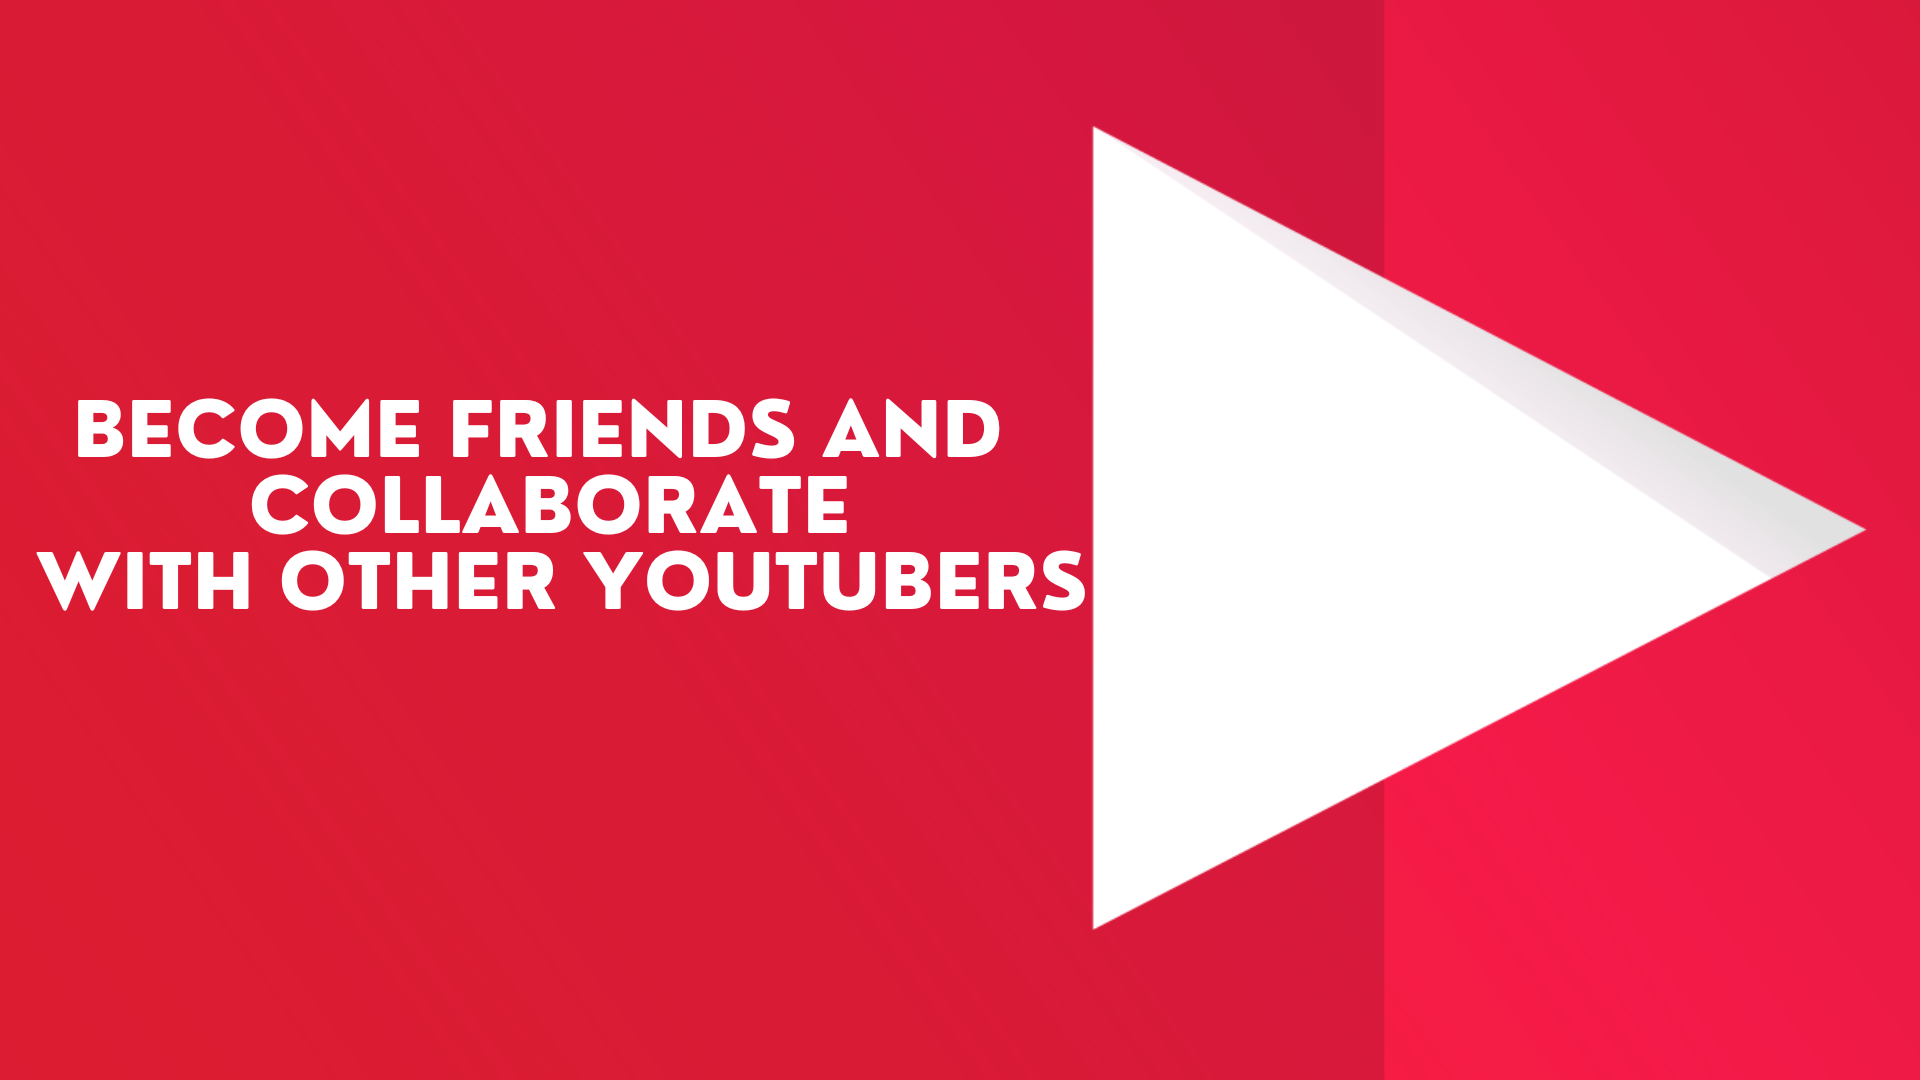 Become friends and collaborate with other YouTubers - Tips to Make Your YouTube Videos Go Viral